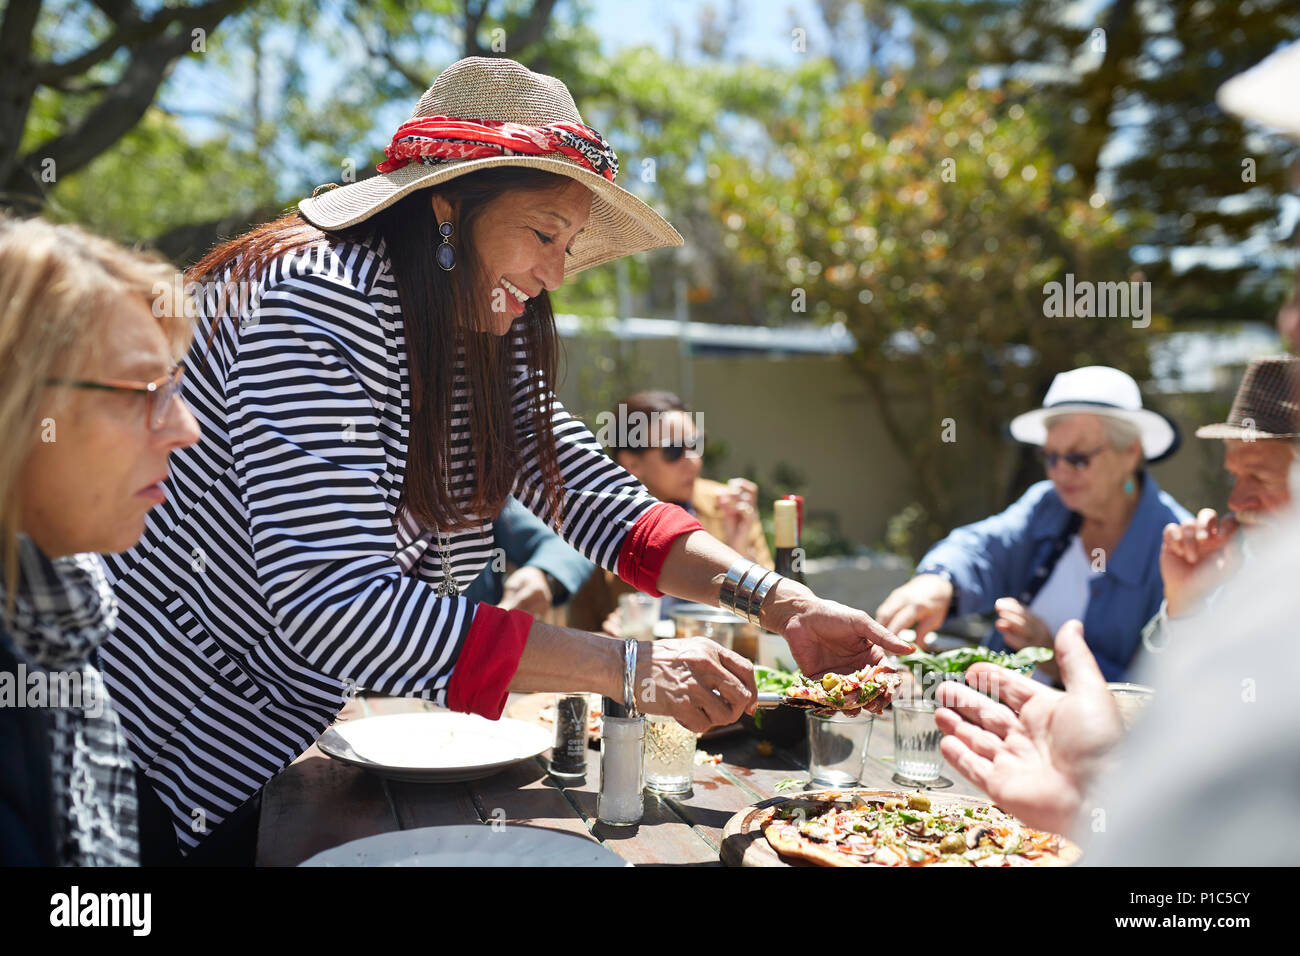 Smiling senior woman reaching for pizza at sunny garden party table Stock Photo